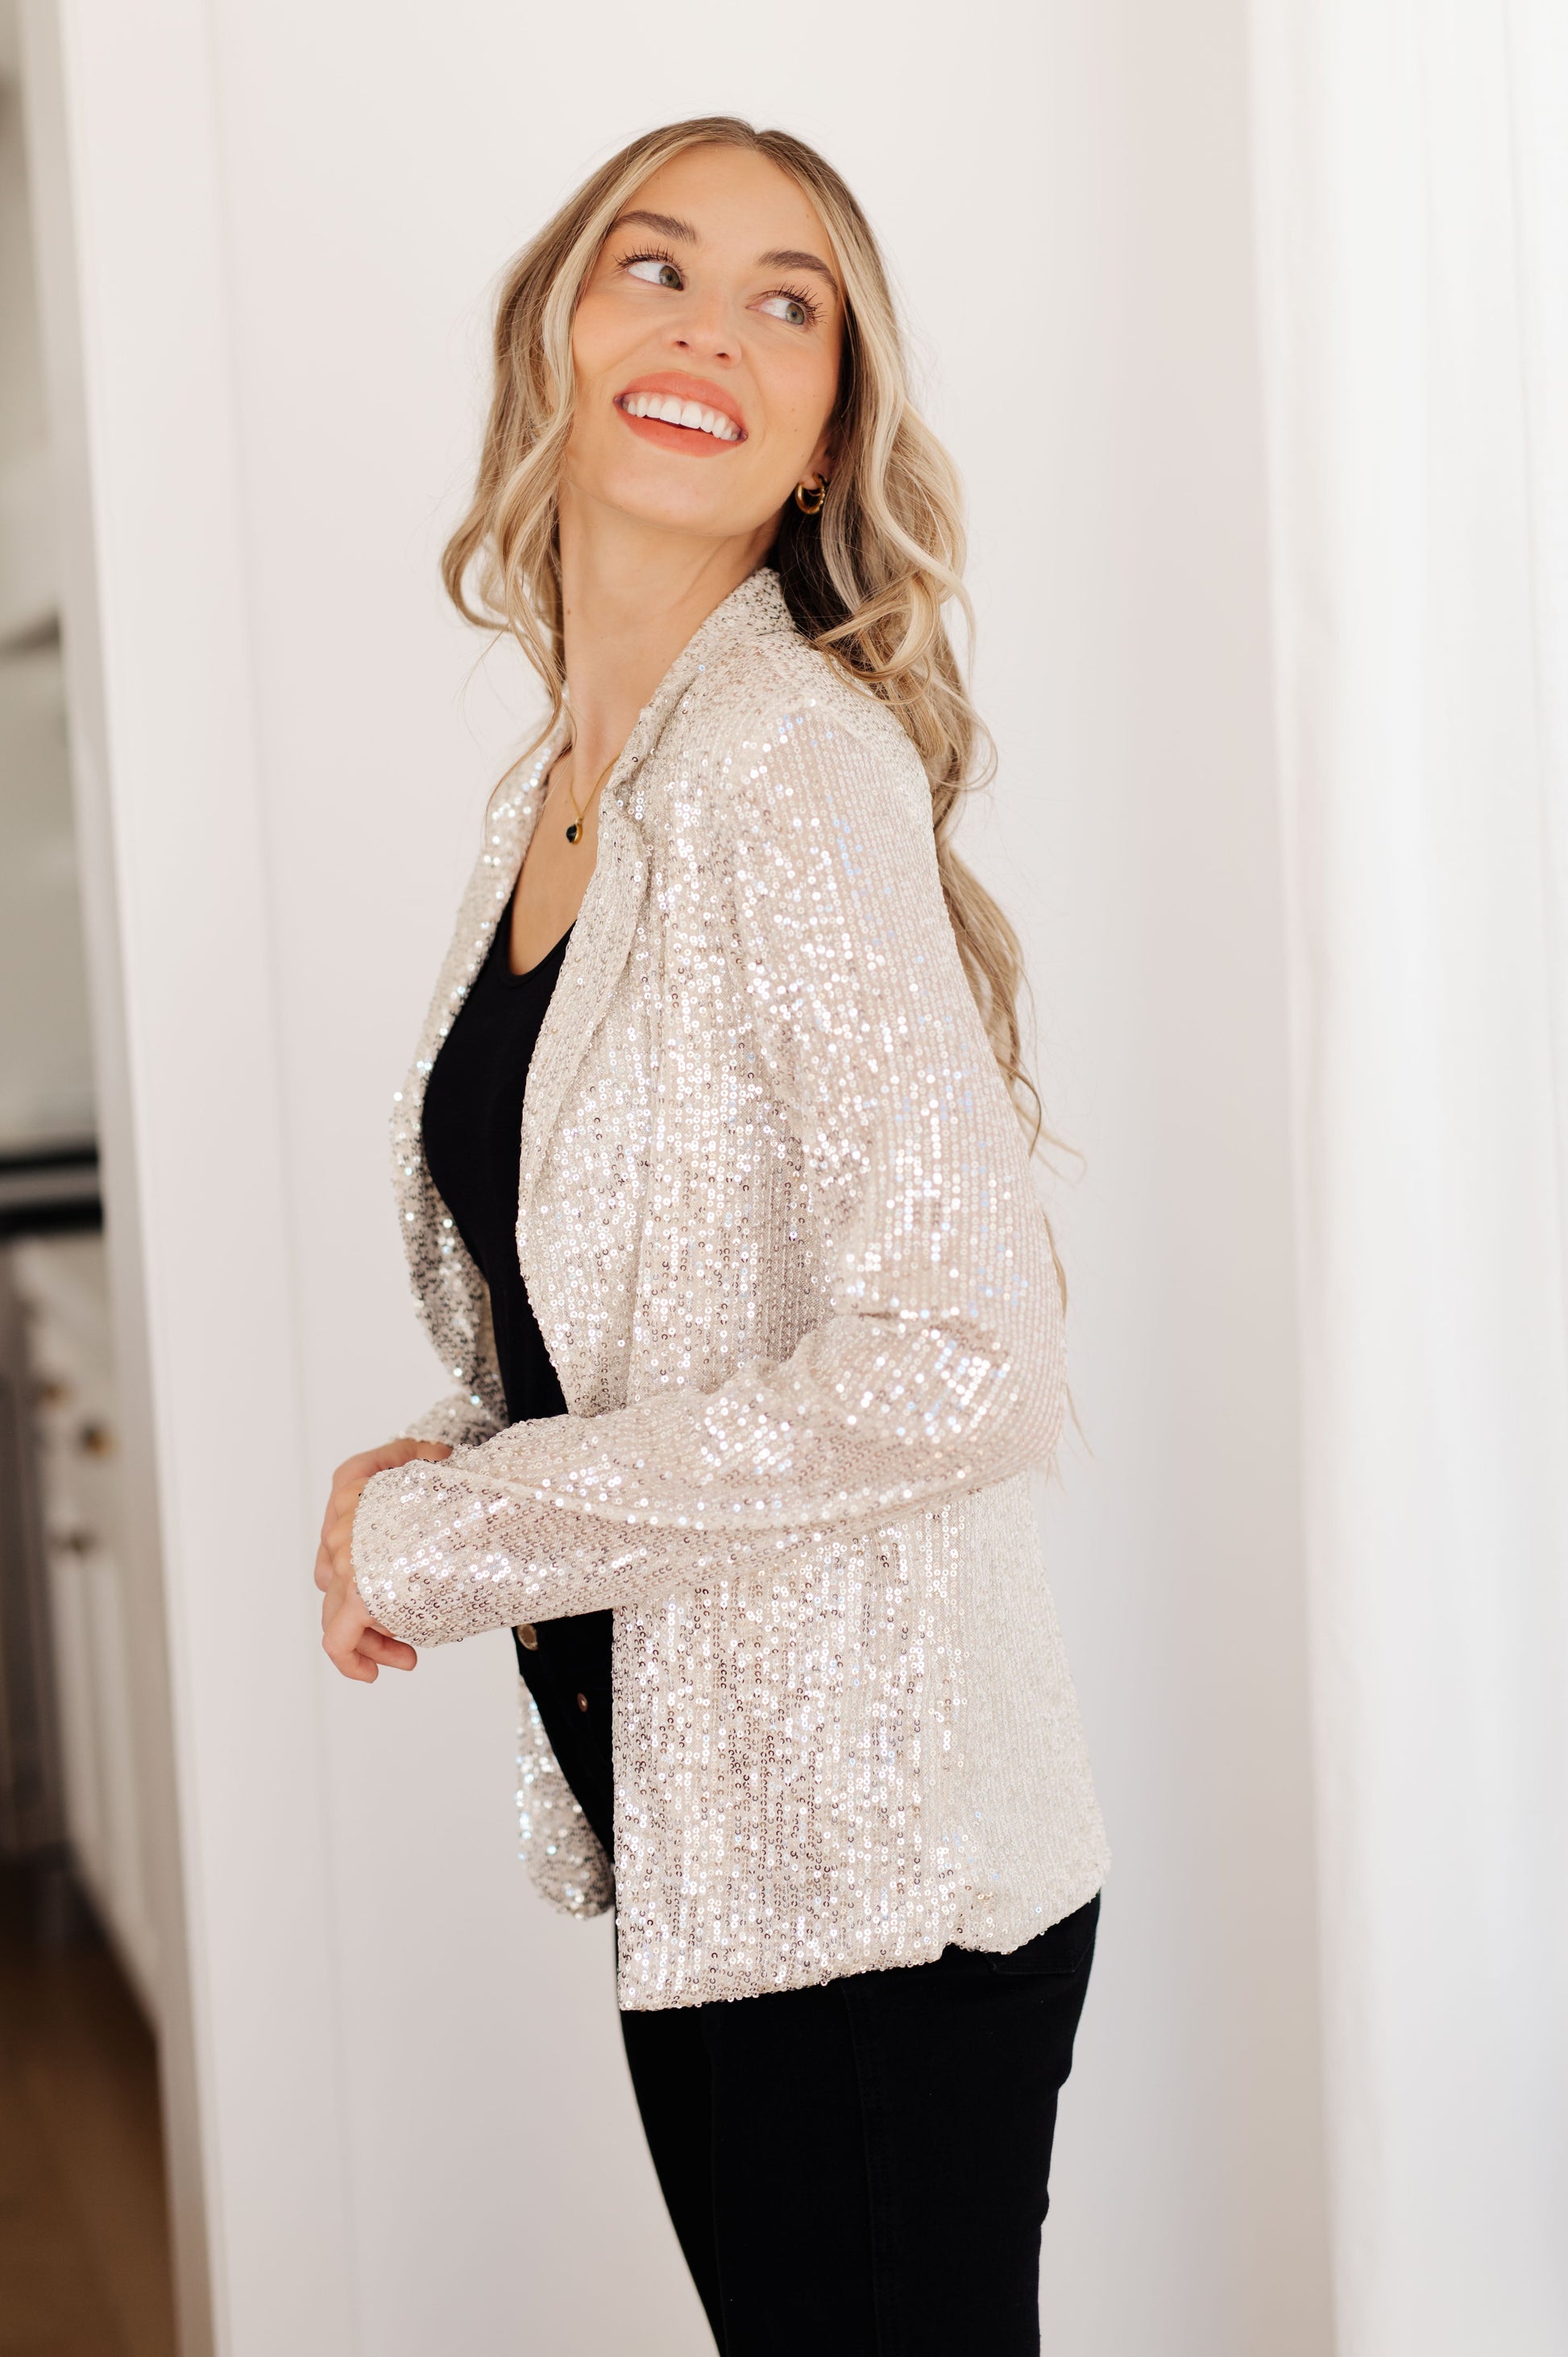 This I Know You're Busy Sequin Blazer will make you a showstopper! Crafted with an all-over silver sequin fabric, this blazer features a notched lapel, pockets, and a relaxed fit. Perfect for a fun evening look! S - 3X